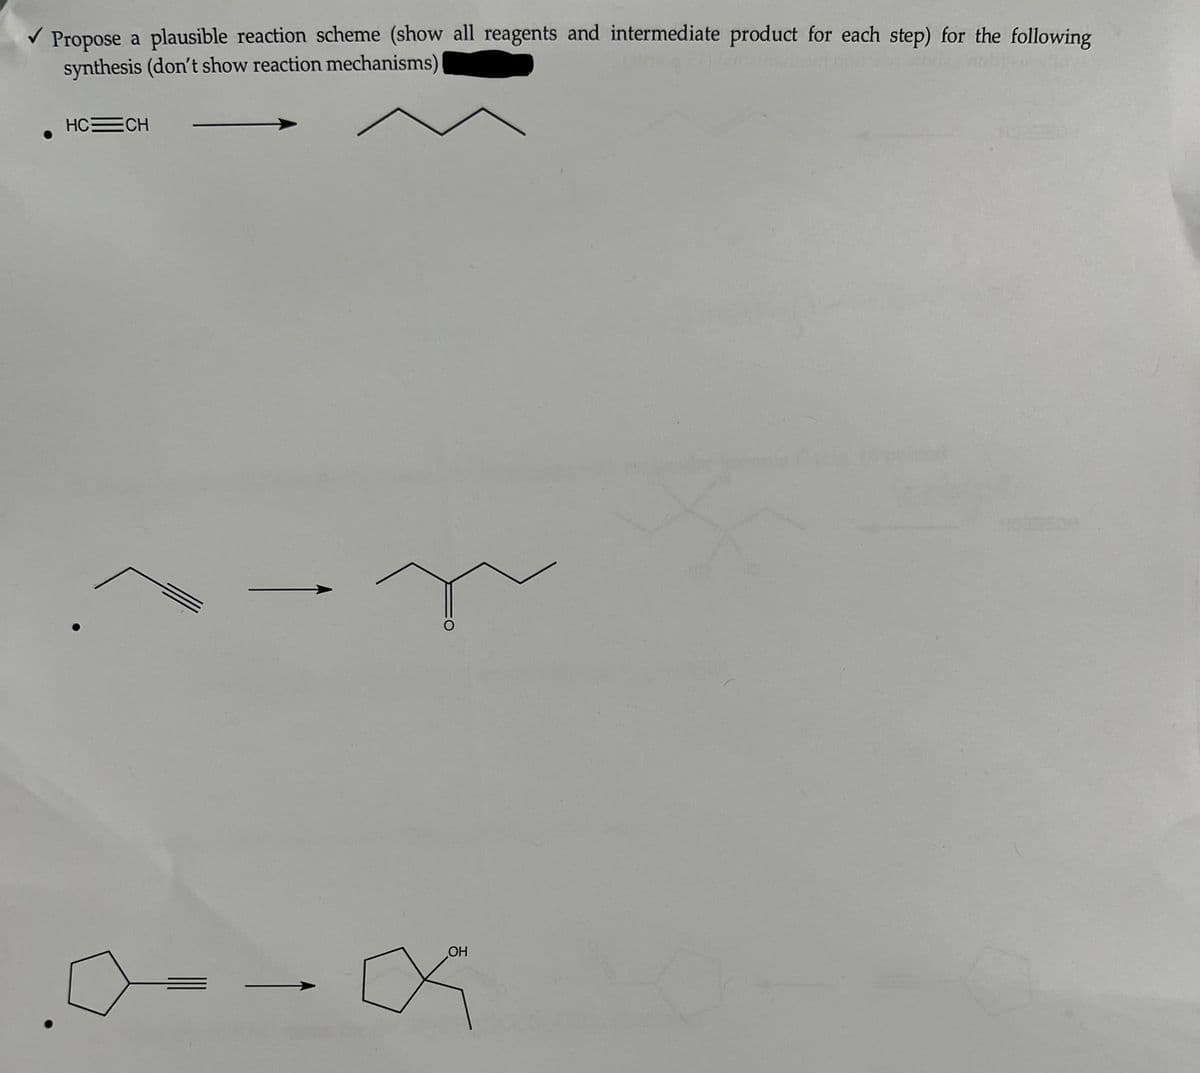 ✓Propose a plausible reaction scheme (show all reagents and intermediate product for each step) for the following
synthesis (don't show reaction mechanisms)
HC=CH
OH